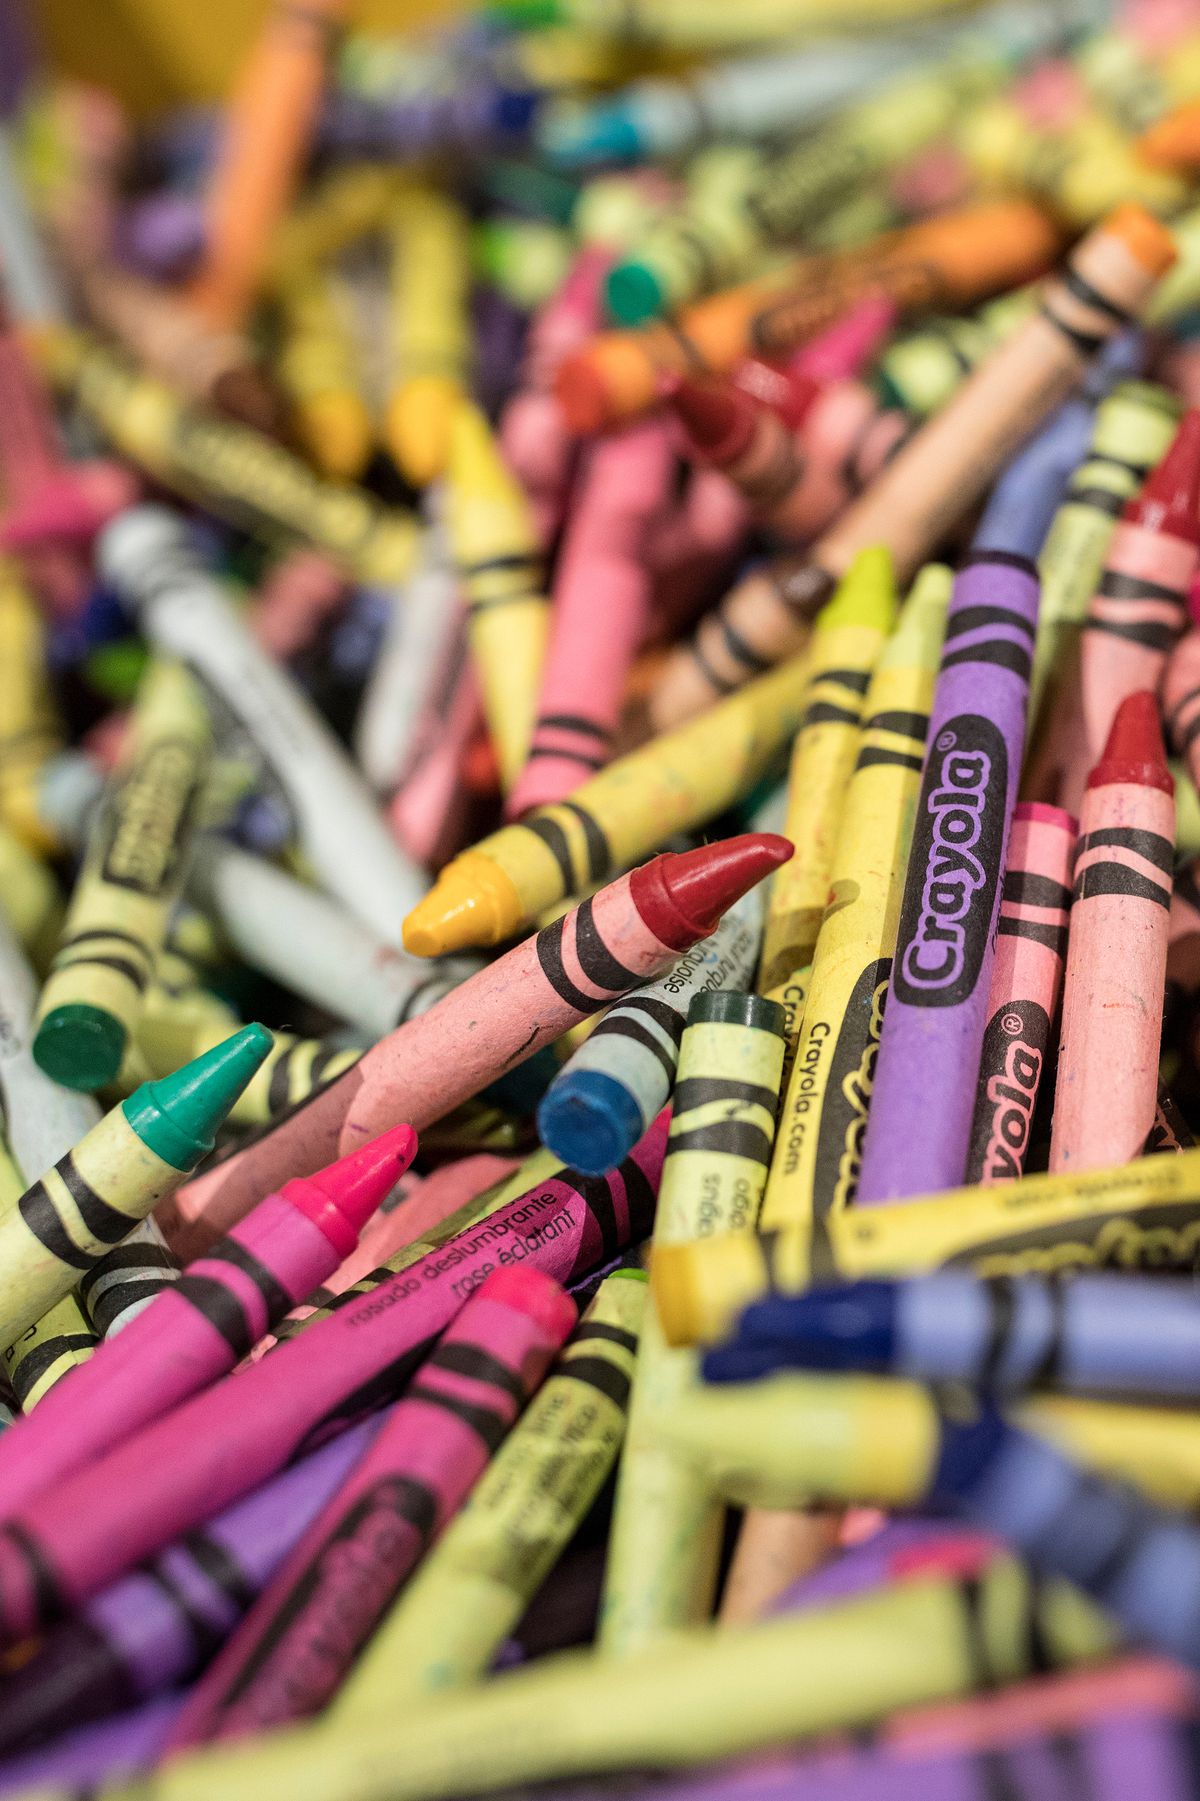 Crayola crayons in a pile